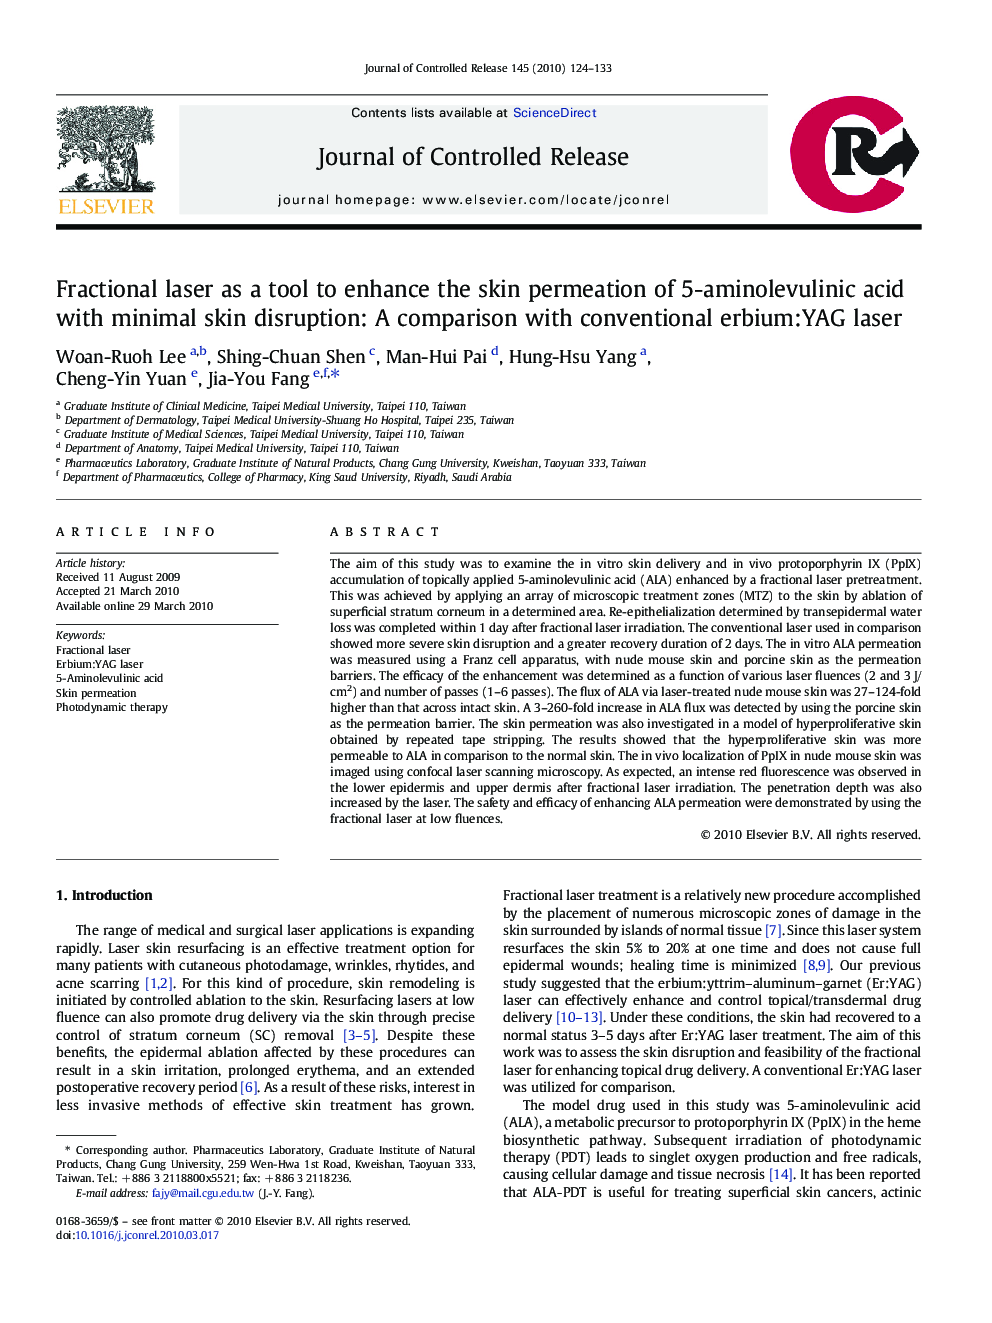 Fractional laser as a tool to enhance the skin permeation of 5-aminolevulinic acid with minimal skin disruption: A comparison with conventional erbium:YAG laser